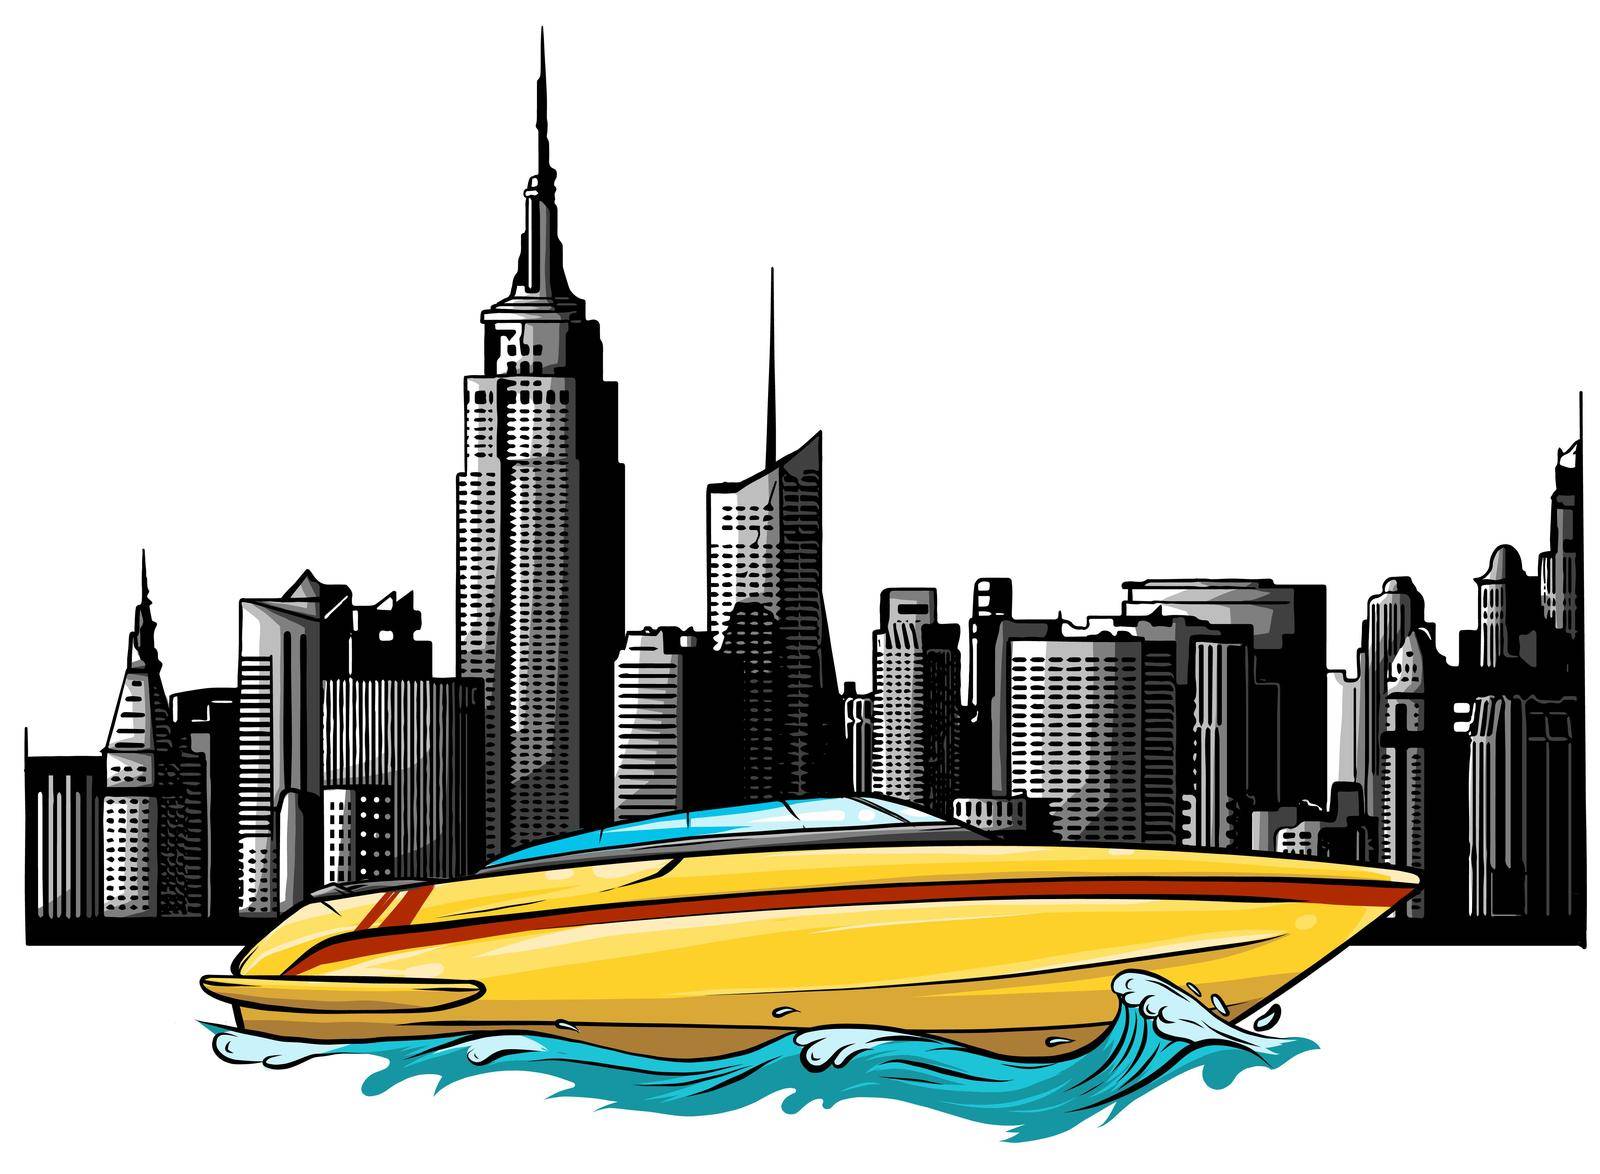 vector Illustration of a luxury private boat on skyscrapers background by dean